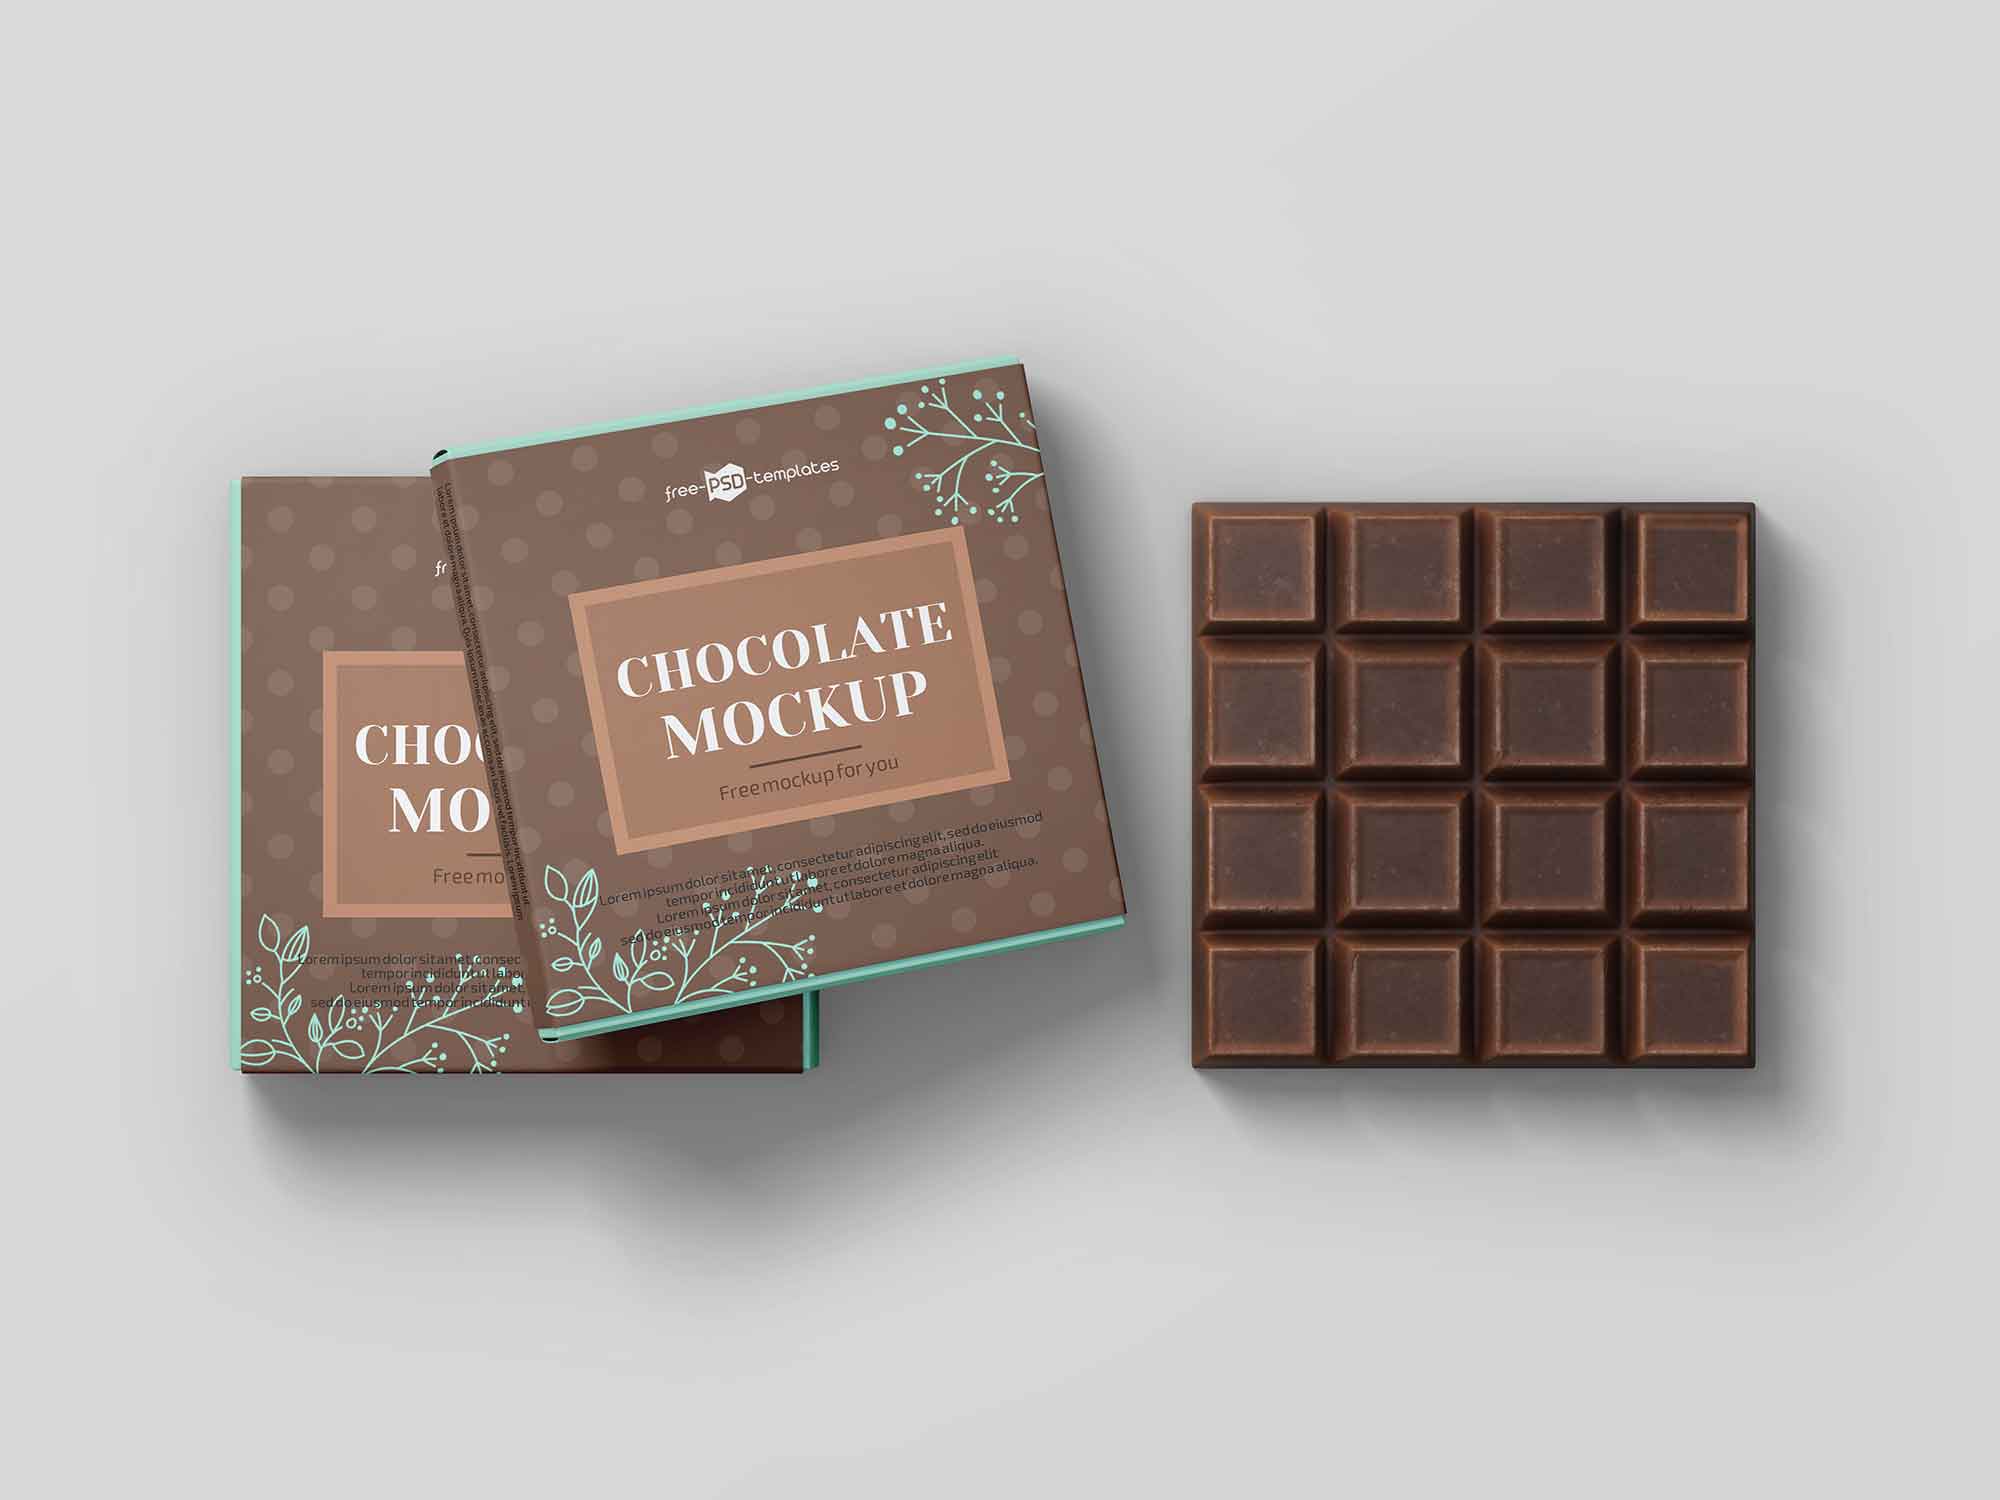 Download Chocolate Bar Mockup Psd Free Download Free Mockups Download Chocolate Bar Mockup Psd Free Download Free Mockups Thank You All So Much For Your Overwhelming Response On Our Previous Blogs A